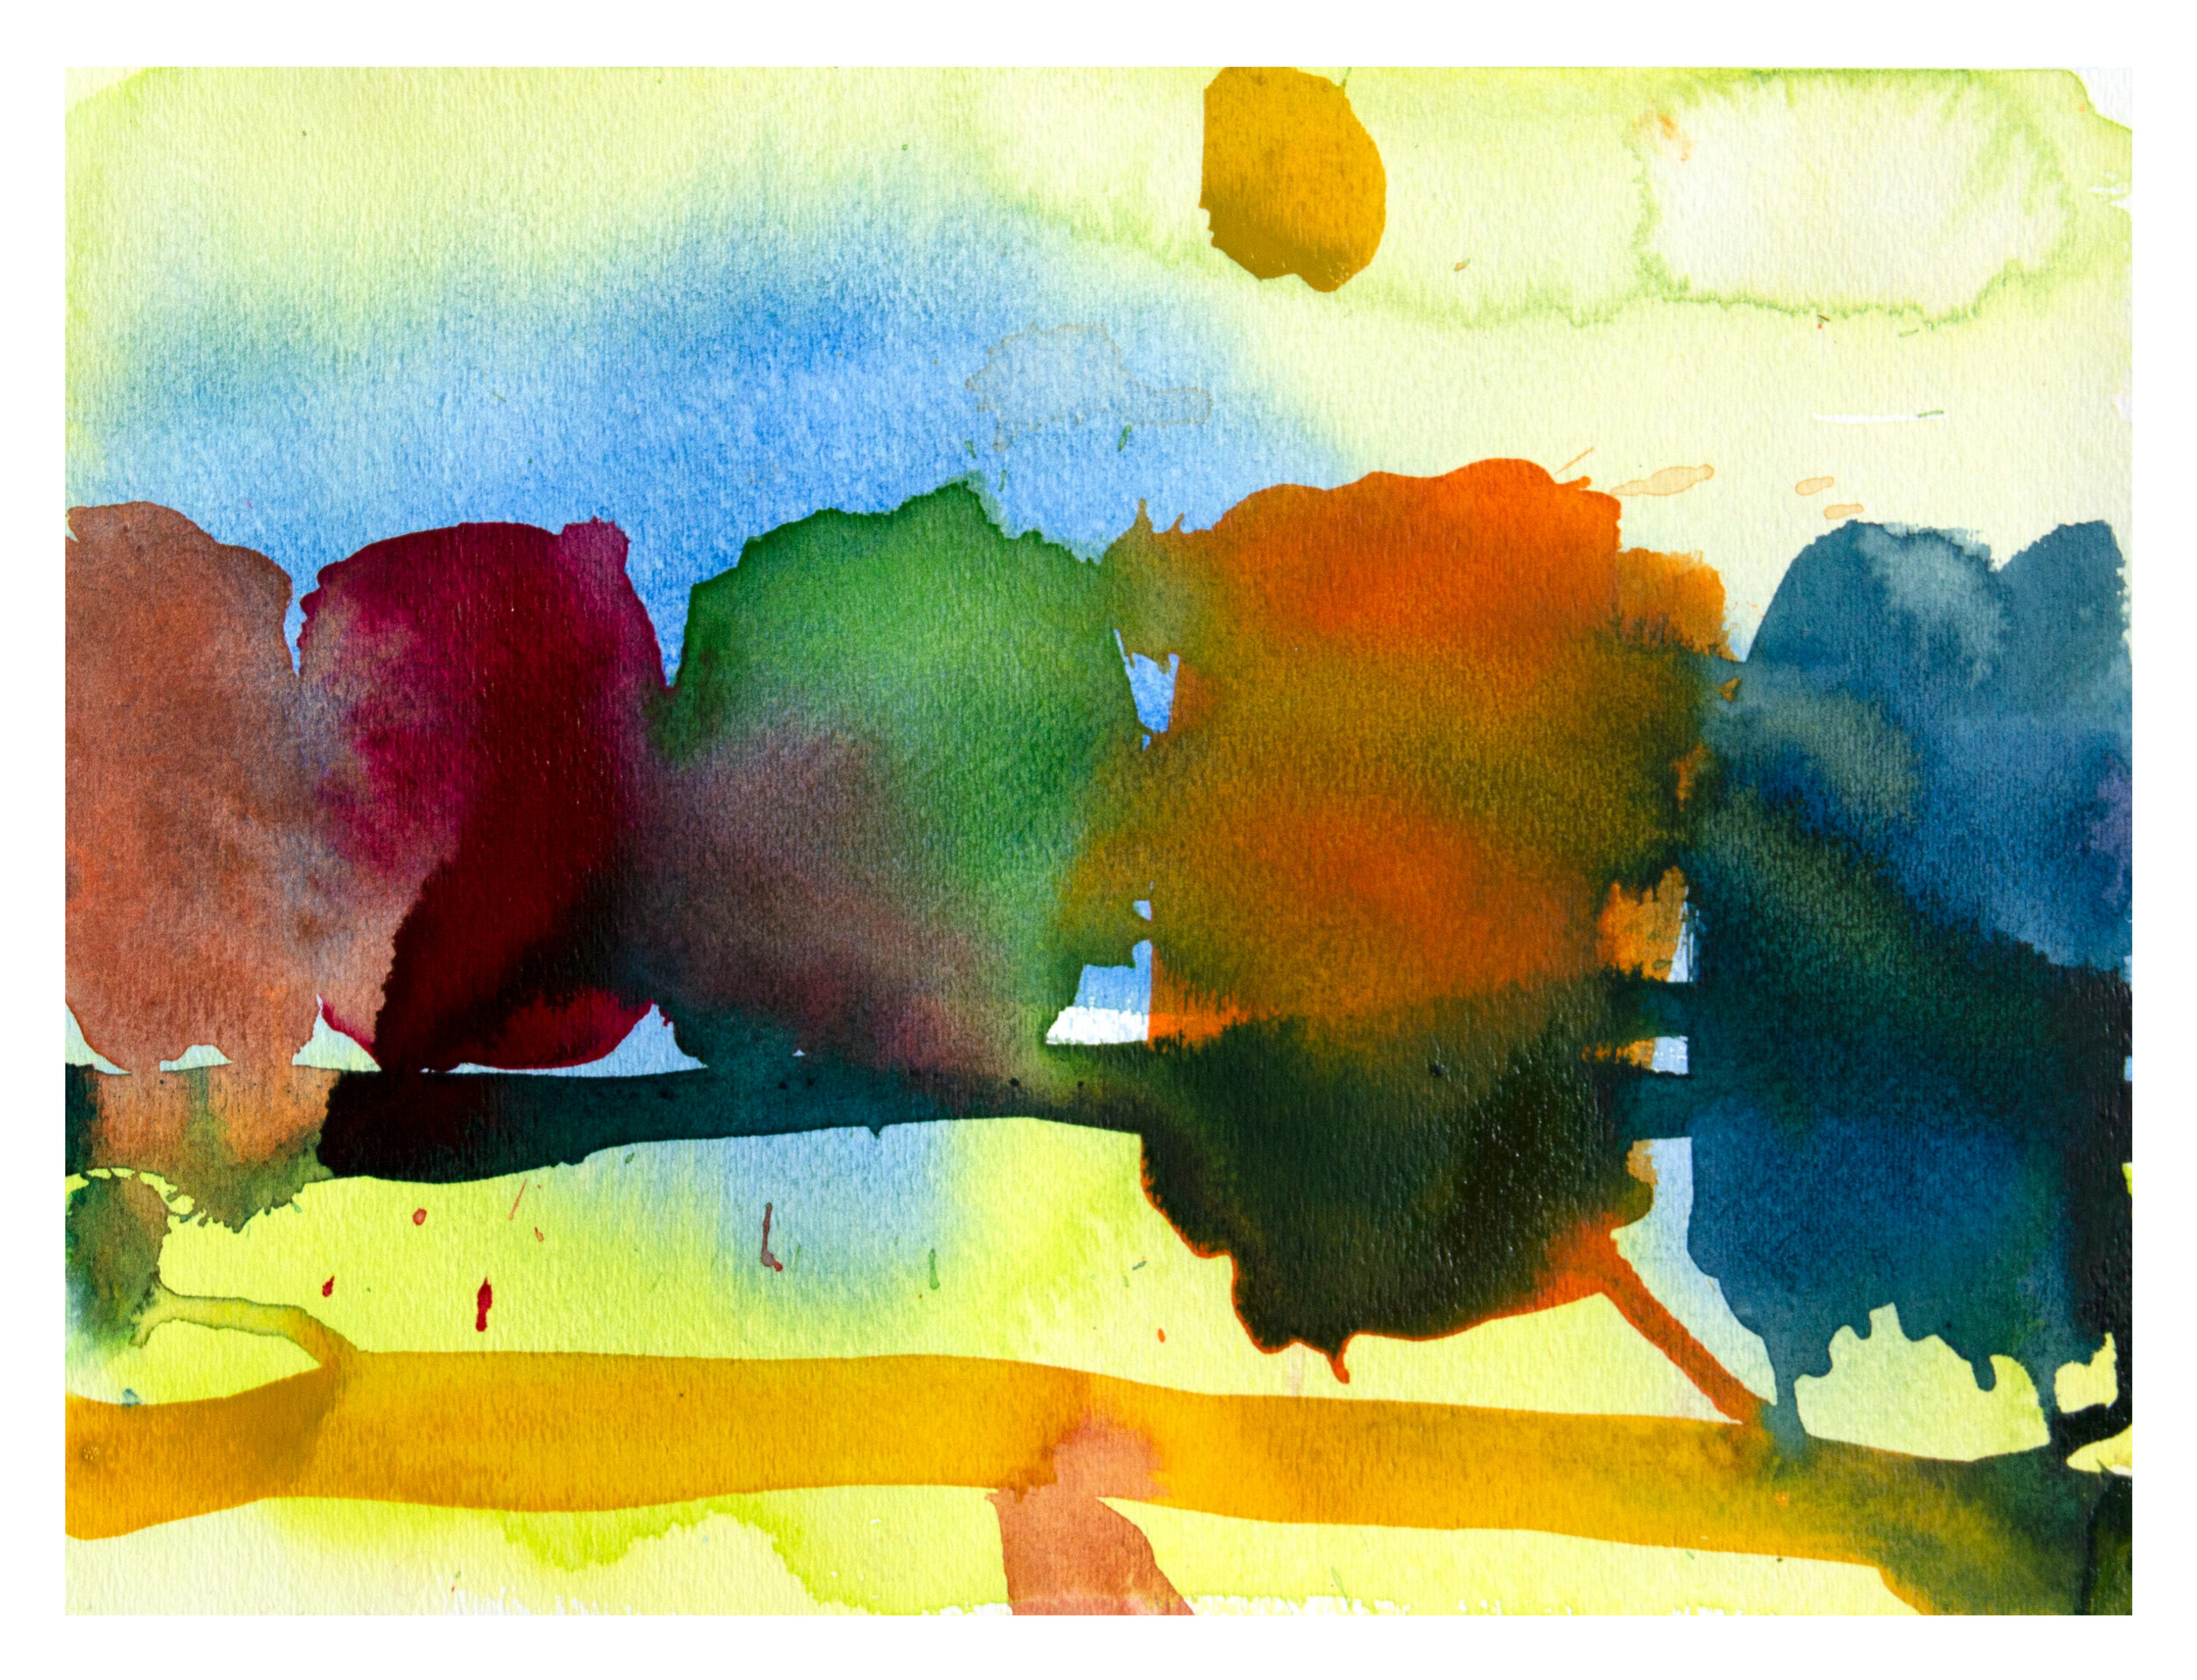 100 Watercolors for Spring (#98)